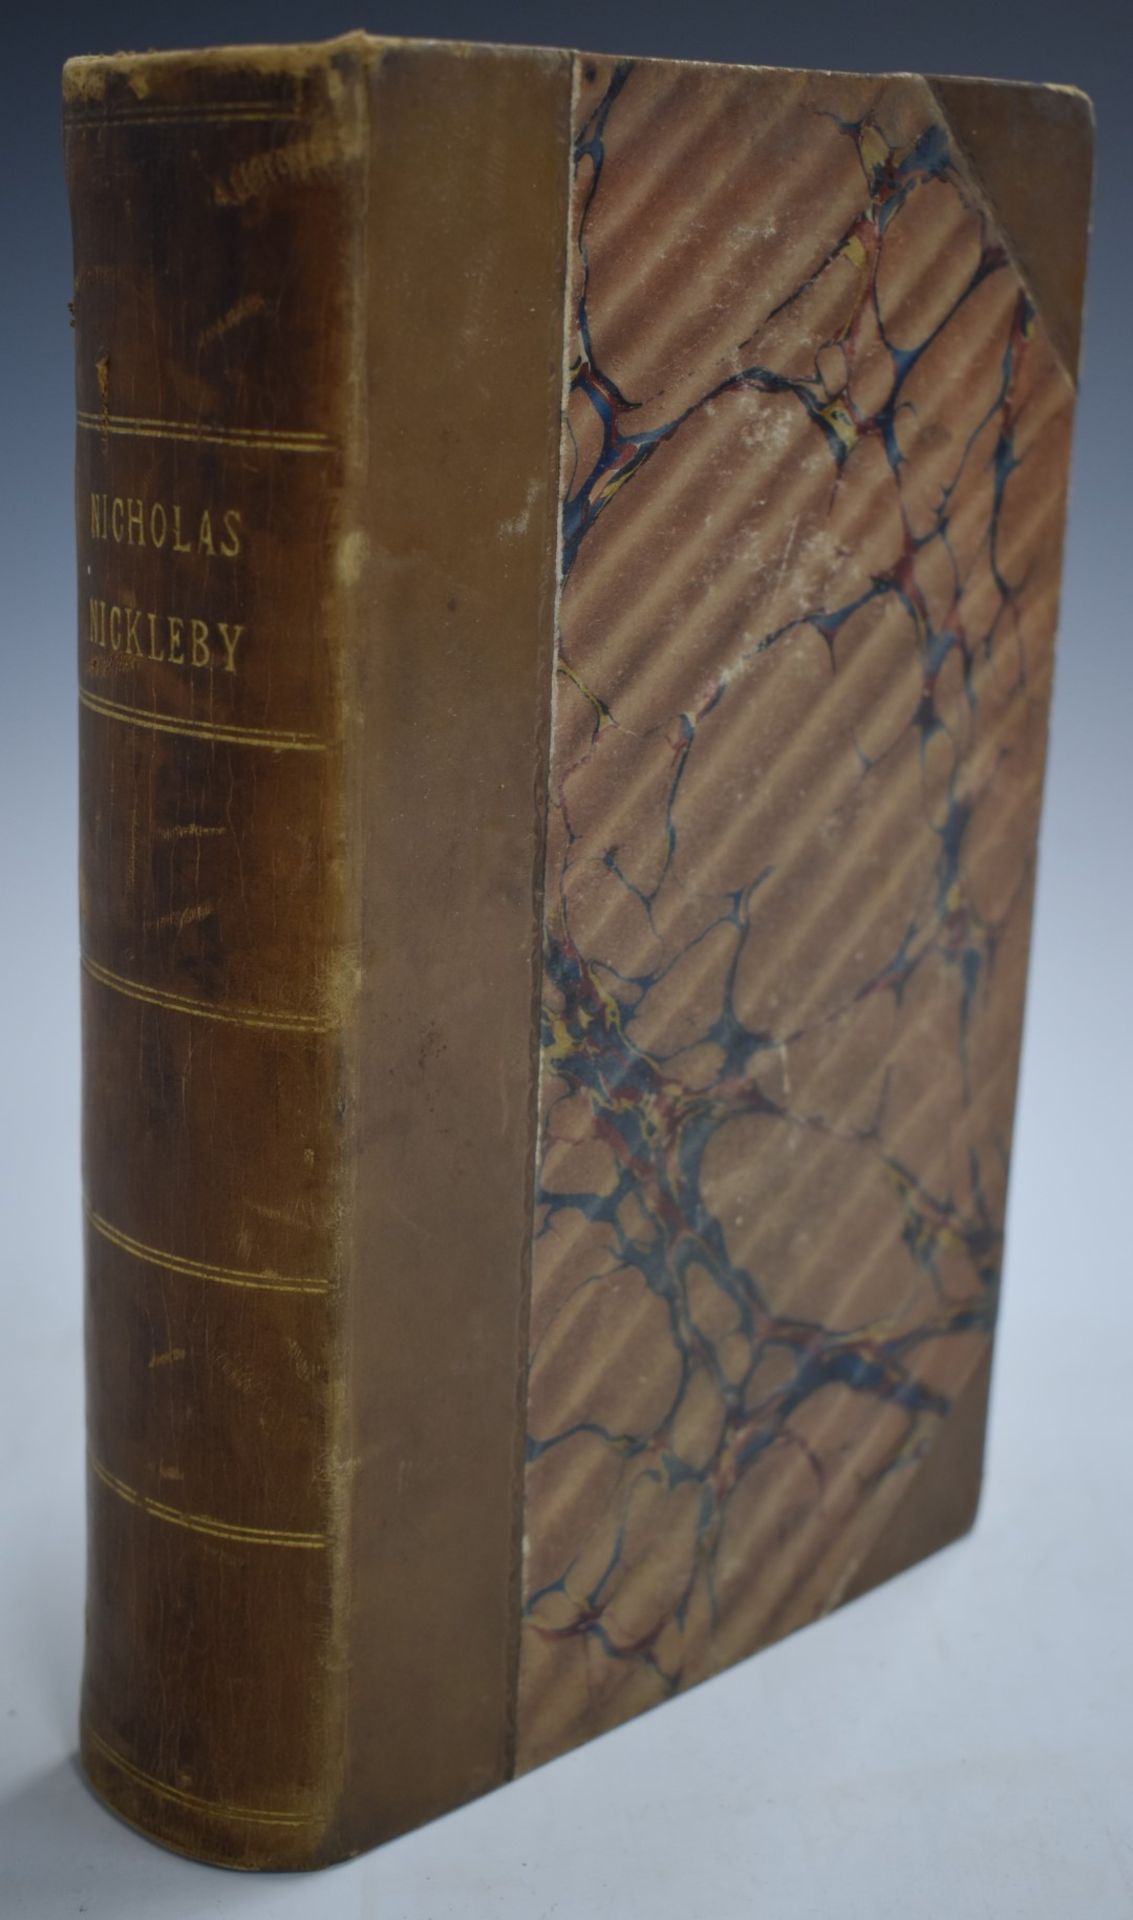 Charles Dickens The Life & Adventures of Nicholas Nickleby with Illustrations by Phiz published